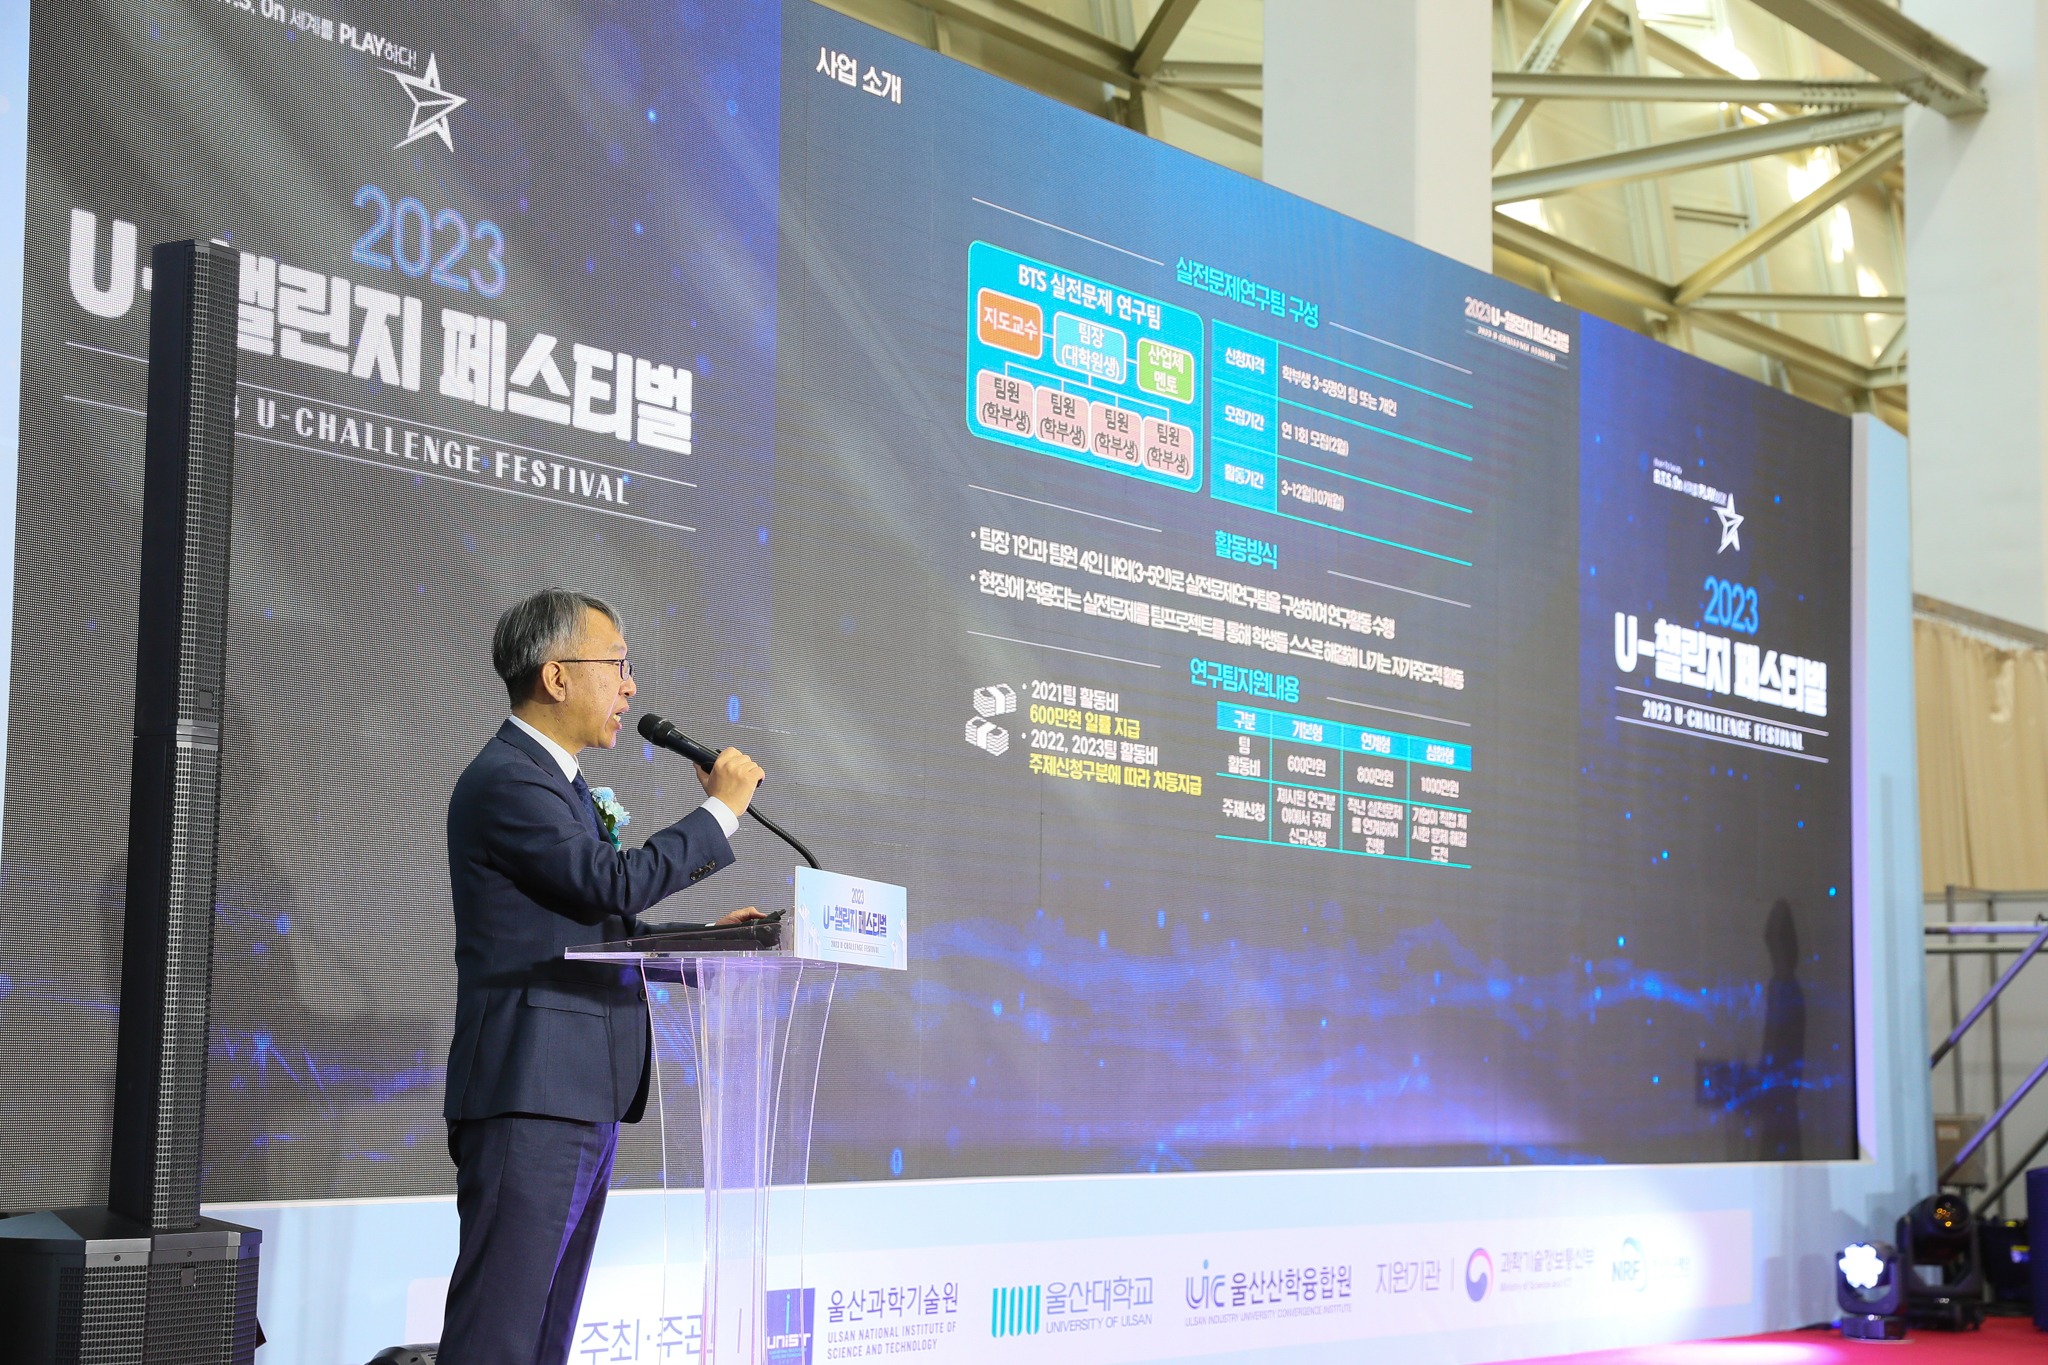 Dean Sung Youb Kim (College of Engineering, UNIST) at the opening ceremony of 2022 U-Challenge Festival, delivering congratulatory remarks.